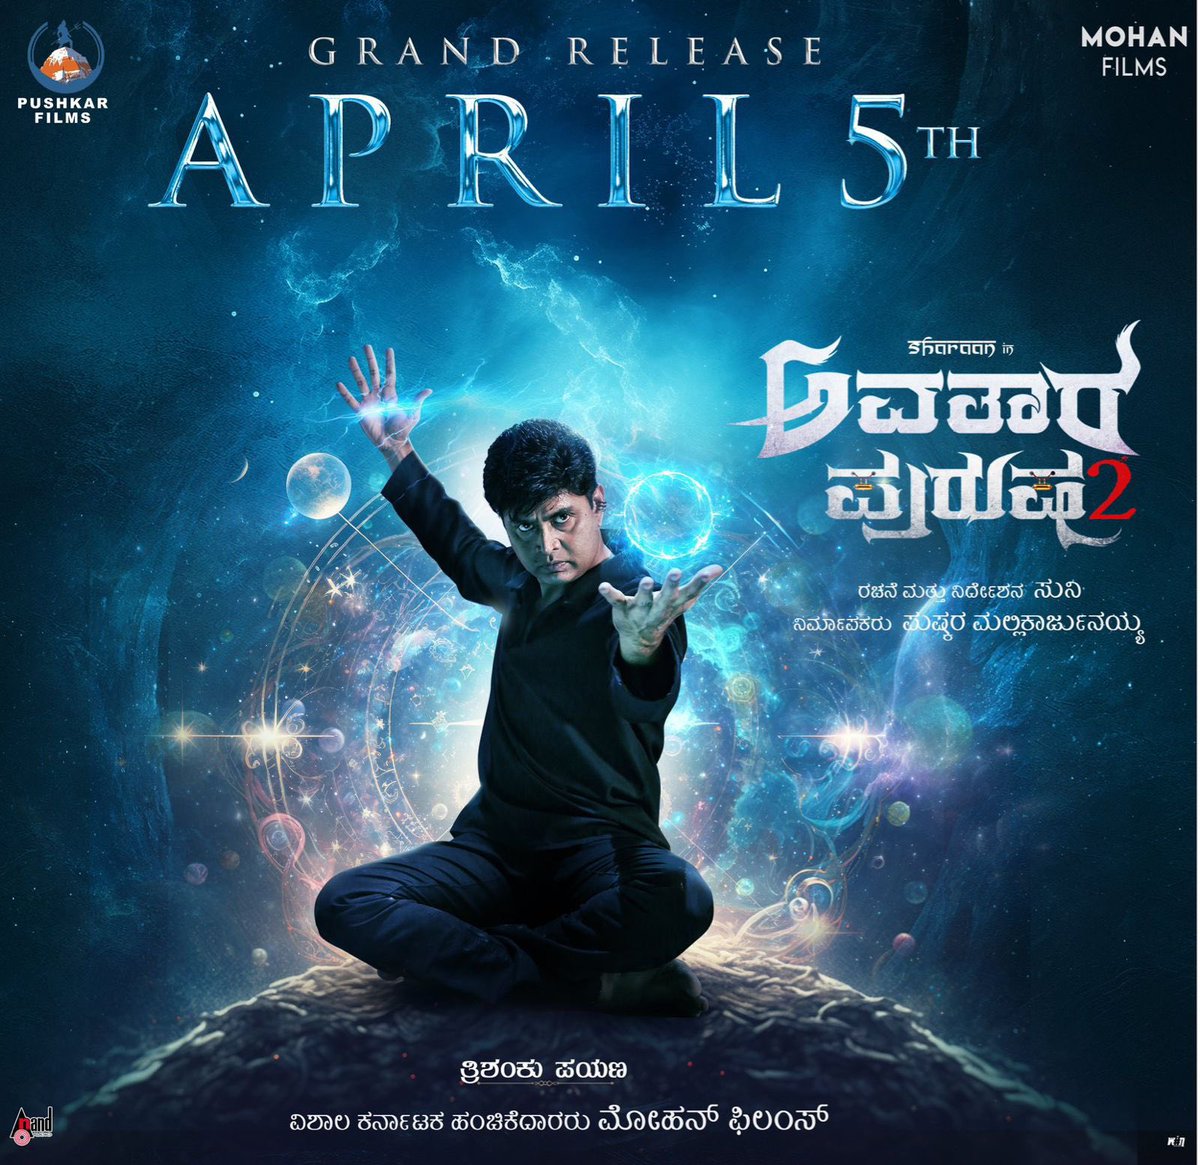 Watch the Part2 of a MagicalBlockbuster film. #avatarapurusha2 Releasing on April5 in UmaTheatre Bellary Book your tickets now on @bookmyshowin